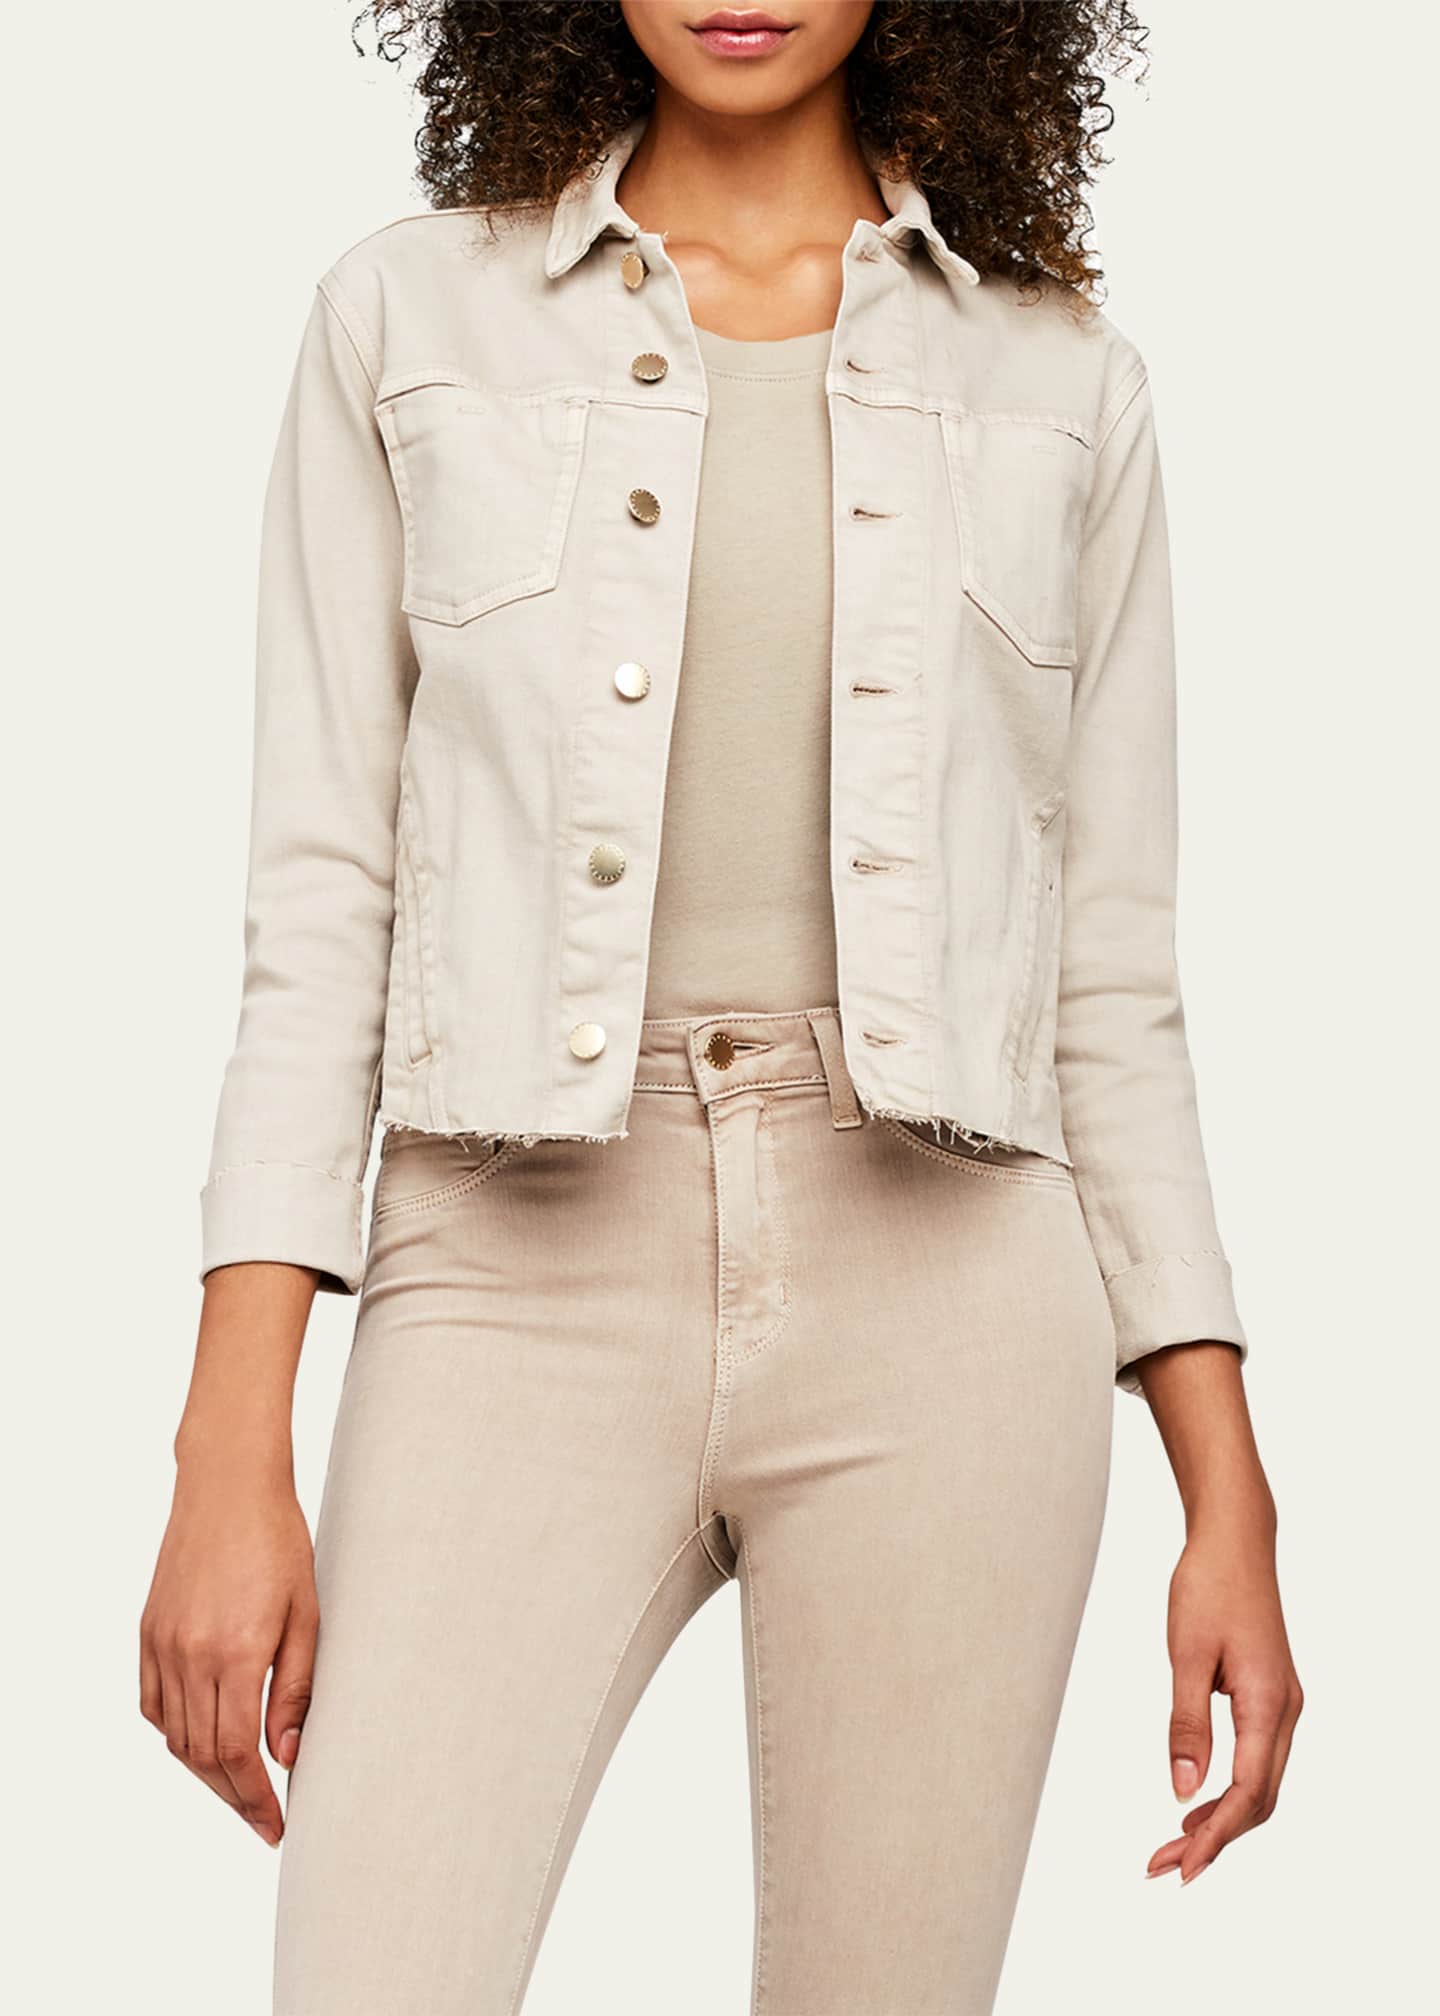 L'Agence Janelle Slim Cropped Jean Jacket with Raw Hem Image 2 of 5